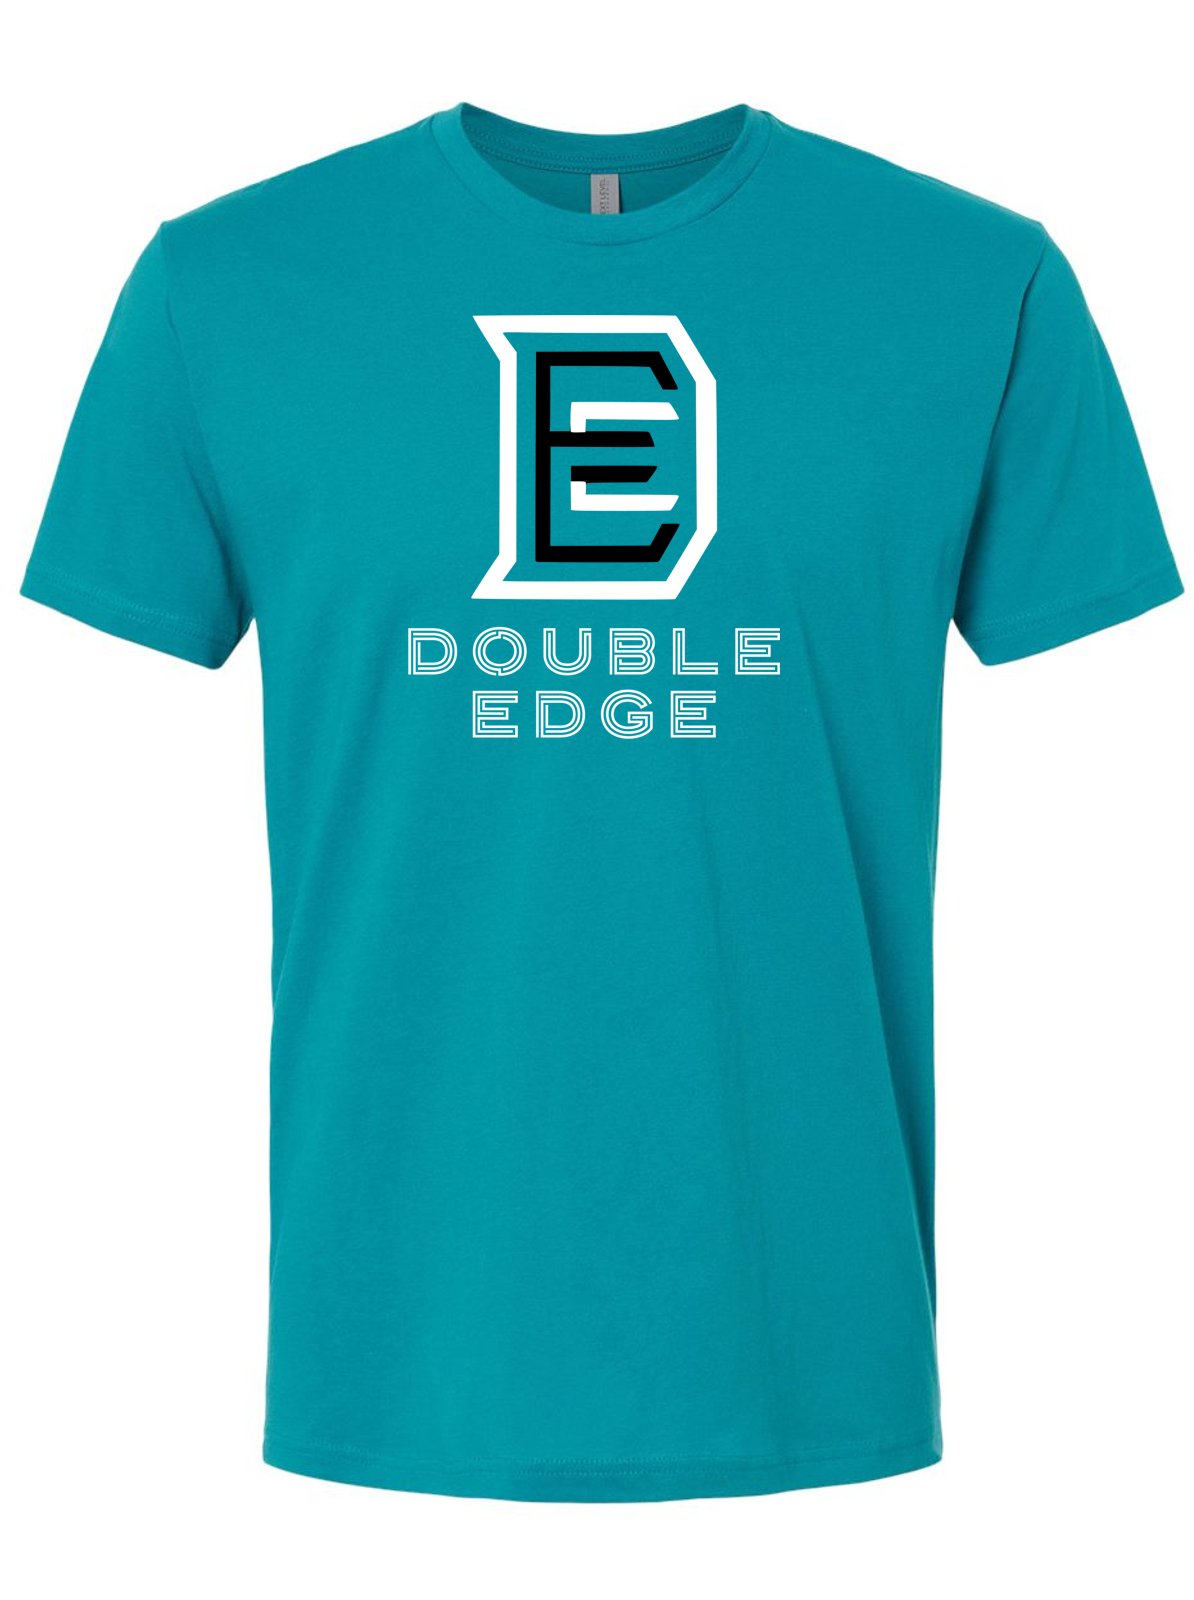 Performance in Style: DE Athletic Brand Teal Typography Shirt -